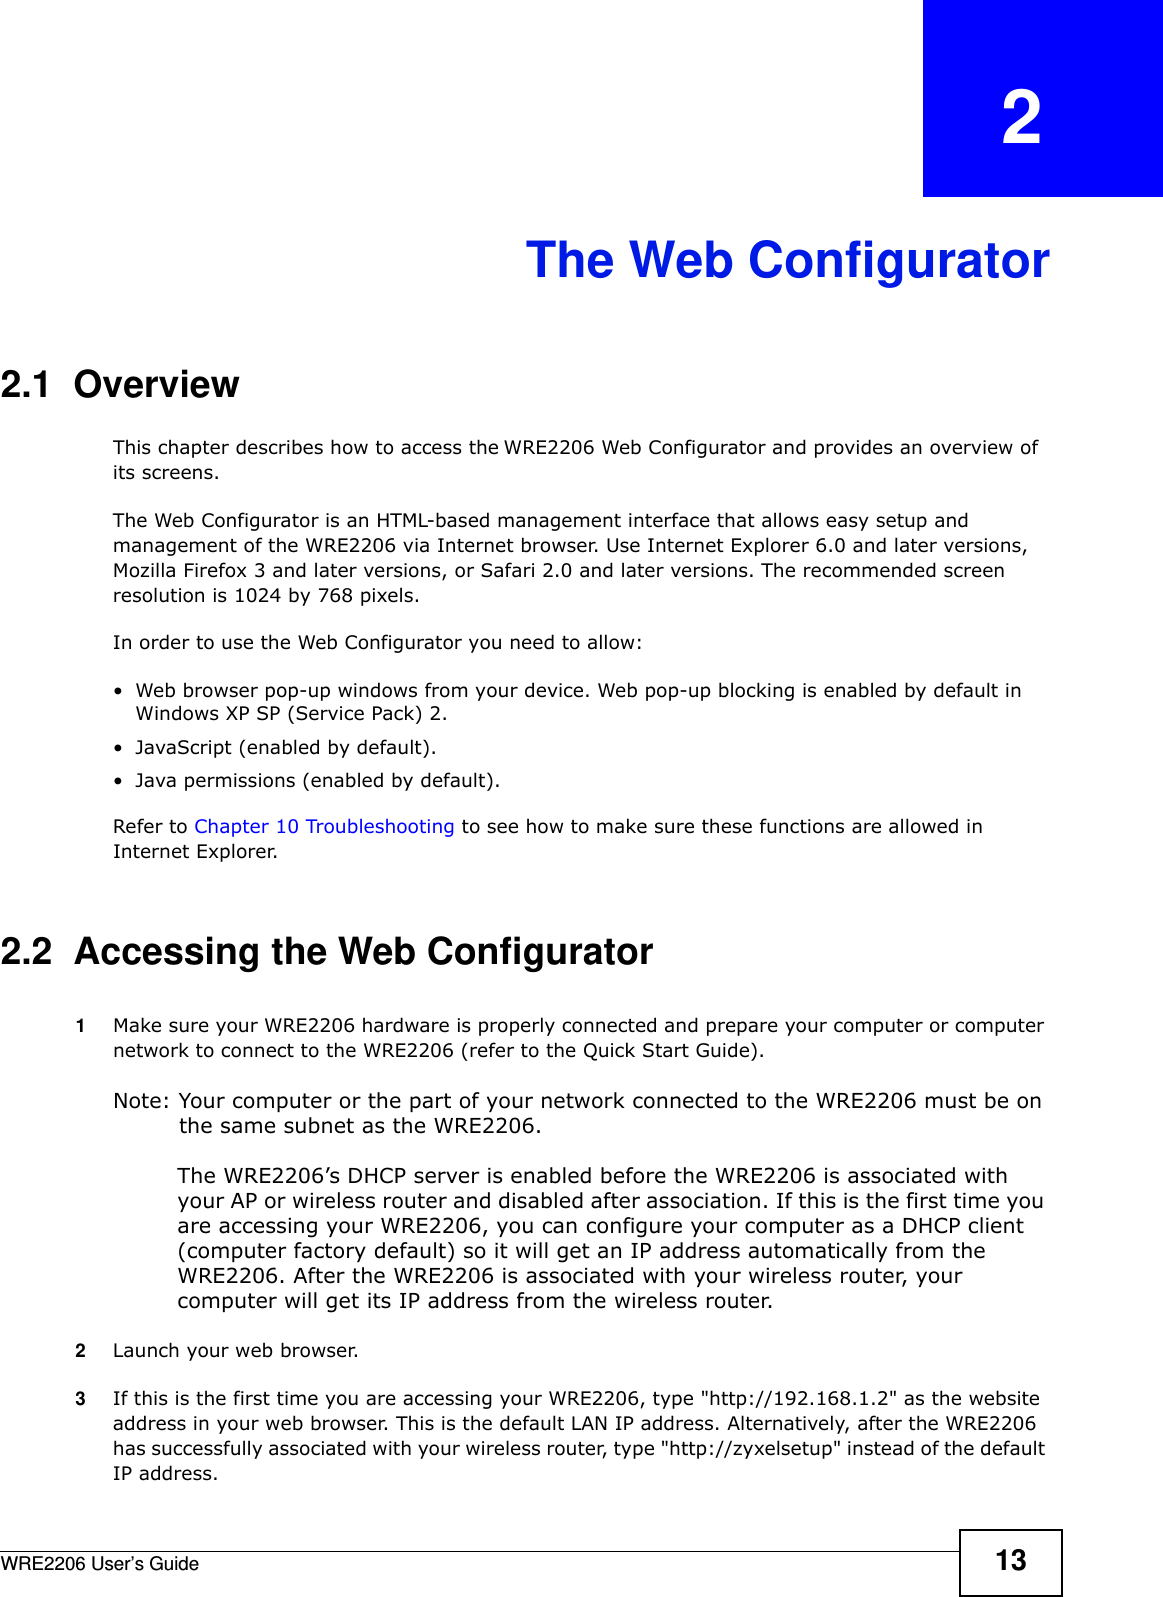 WRE2206 User’s Guide 13CHAPTER   2The Web Configurator2.1  OverviewThis chapter describes how to access the WRE2206 Web Configurator and provides an overview of its screens.The Web Configurator is an HTML-based management interface that allows easy setup and management of the WRE2206 via Internet browser. Use Internet Explorer 6.0 and later versions, Mozilla Firefox 3 and later versions, or Safari 2.0 and later versions. The recommended screen resolution is 1024 by 768 pixels.In order to use the Web Configurator you need to allow:• Web browser pop-up windows from your device. Web pop-up blocking is enabled by default in Windows XP SP (Service Pack) 2.• JavaScript (enabled by default).• Java permissions (enabled by default).Refer to Chapter 10 Troubleshooting to see how to make sure these functions are allowed in Internet Explorer.2.2  Accessing the Web Configurator1Make sure your WRE2206 hardware is properly connected and prepare your computer or computer network to connect to the WRE2206 (refer to the Quick Start Guide).Note: Your computer or the part of your network connected to the WRE2206 must be on the same subnet as the WRE2206. The WRE2206’s DHCP server is enabled before the WRE2206 is associated with your AP or wireless router and disabled after association. If this is the first time you are accessing your WRE2206, you can configure your computer as a DHCP client (computer factory default) so it will get an IP address automatically from the WRE2206. After the WRE2206 is associated with your wireless router, your computer will get its IP address from the wireless router.2Launch your web browser.3If this is the first time you are accessing your WRE2206, type &quot;http://192.168.1.2&quot; as the website address in your web browser. This is the default LAN IP address. Alternatively, after the WRE2206 has successfully associated with your wireless router, type &quot;http://zyxelsetup&quot; instead of the default IP address.